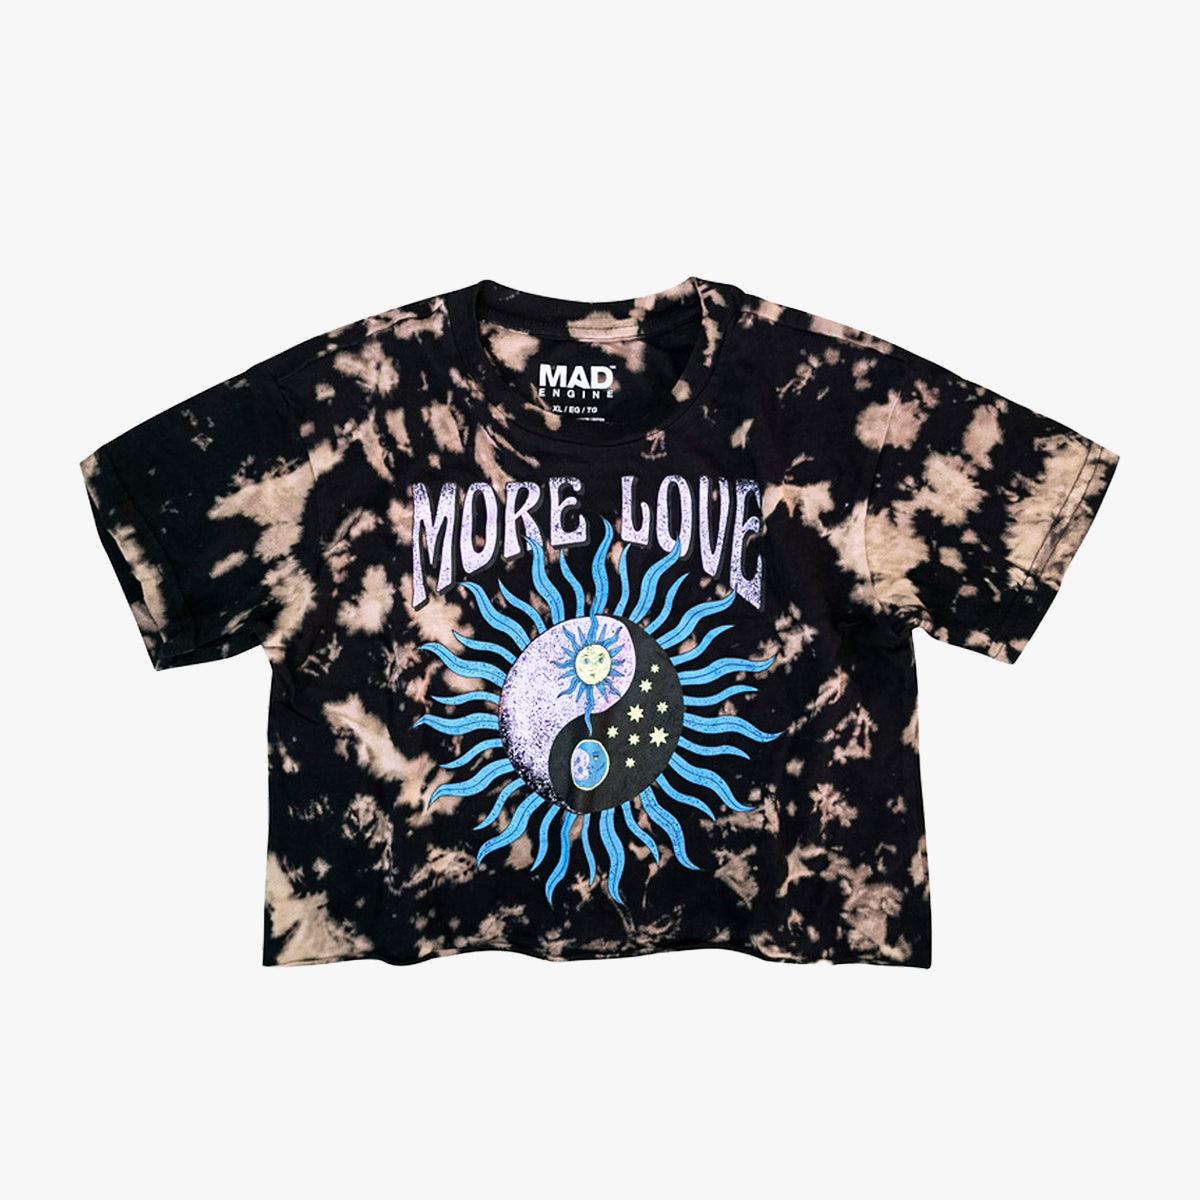 Aesthetic Crop Top More Love Tie Dye - Aesthetic Clothes Shop